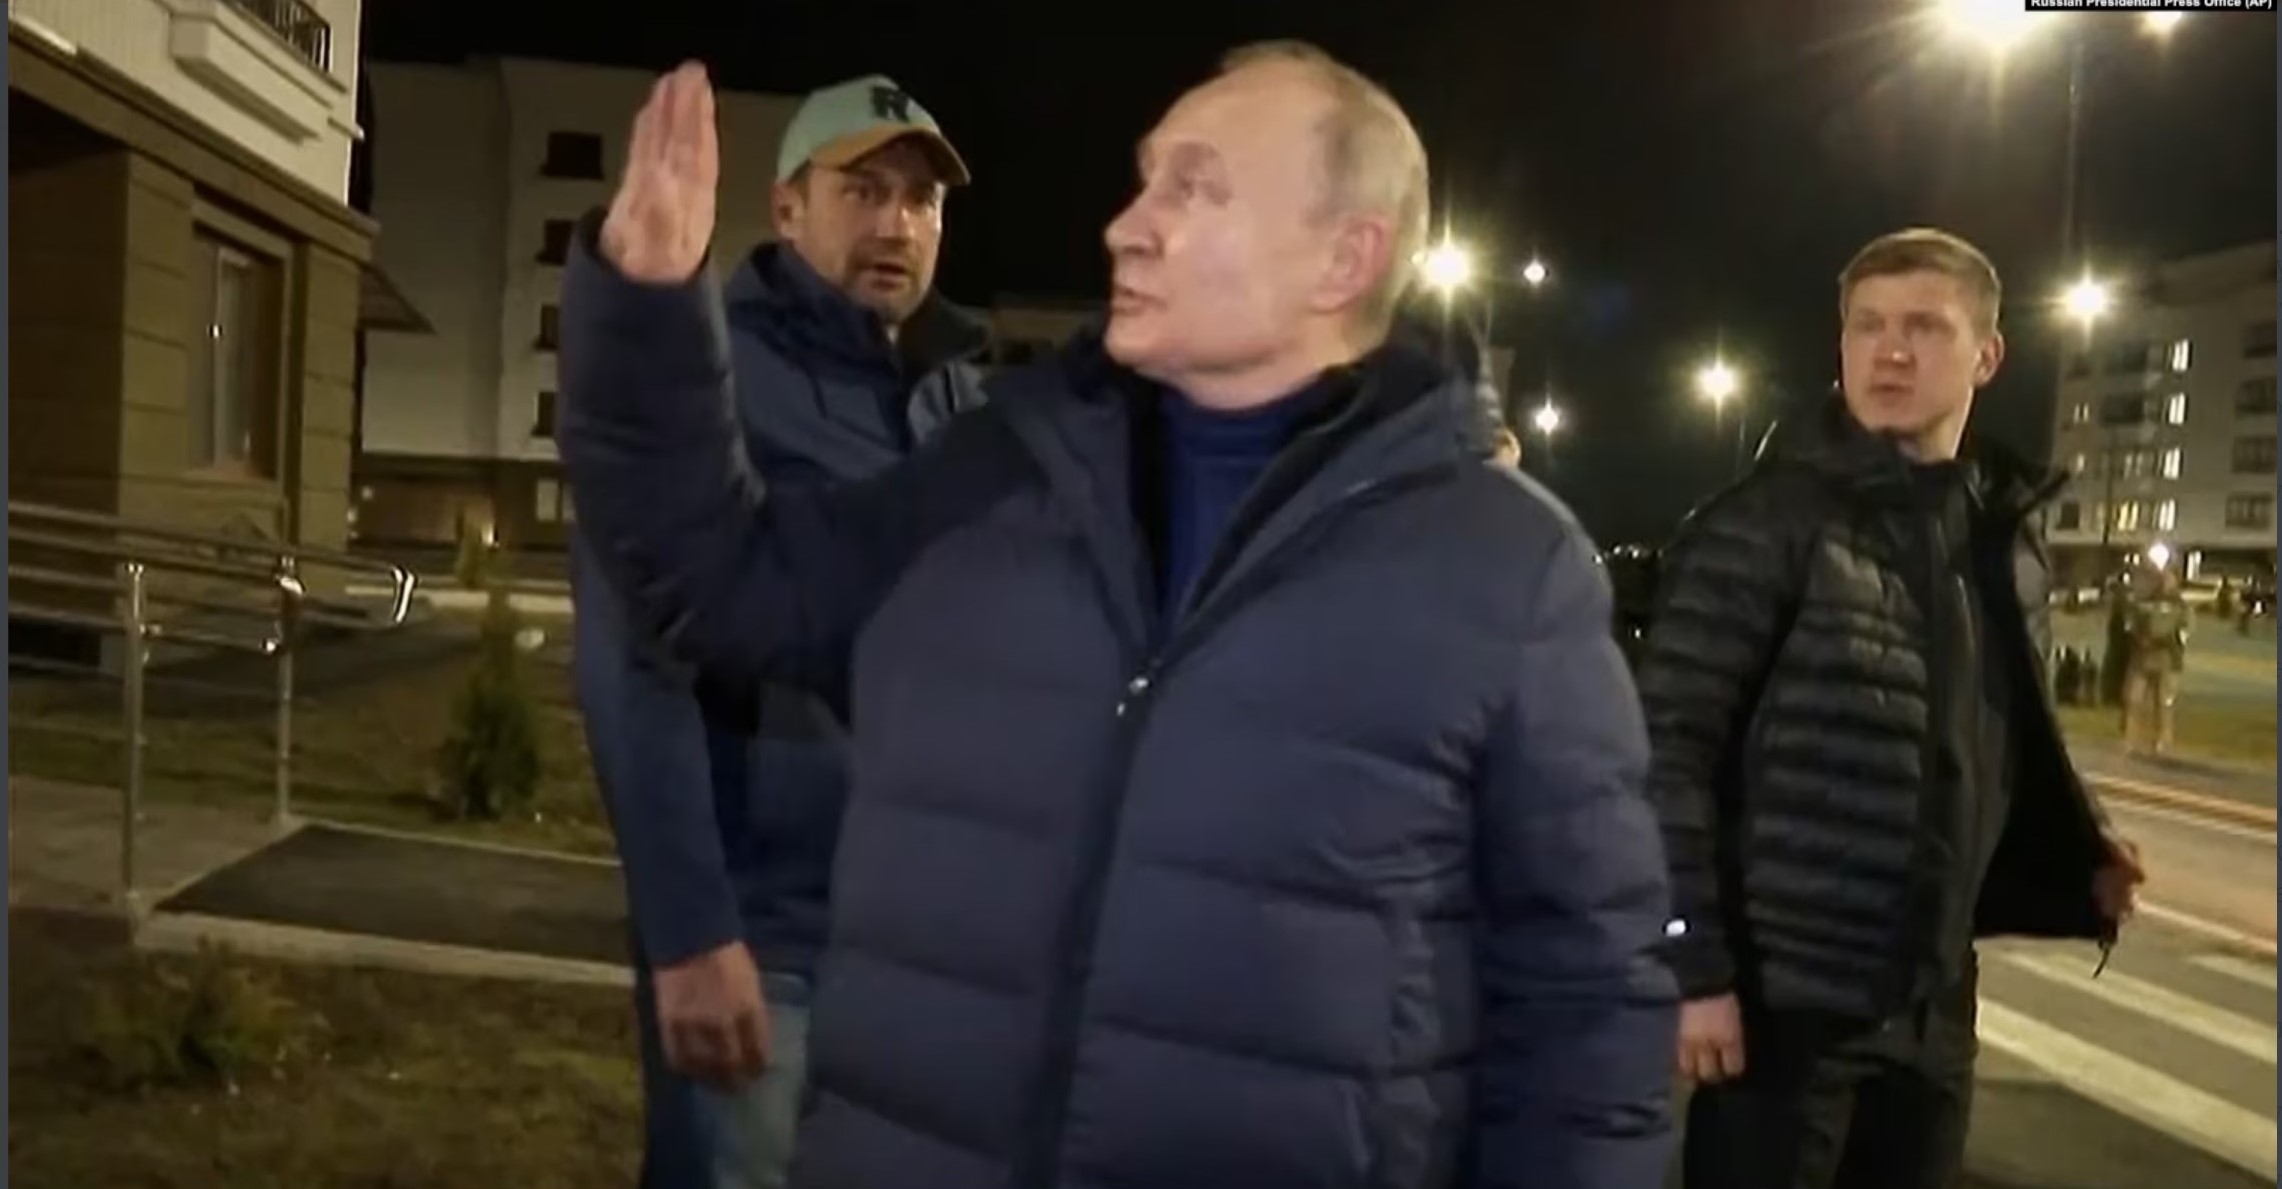 Putin in a carefully orchestrated and edited visit by night to Mariupol Screenshot from the official video